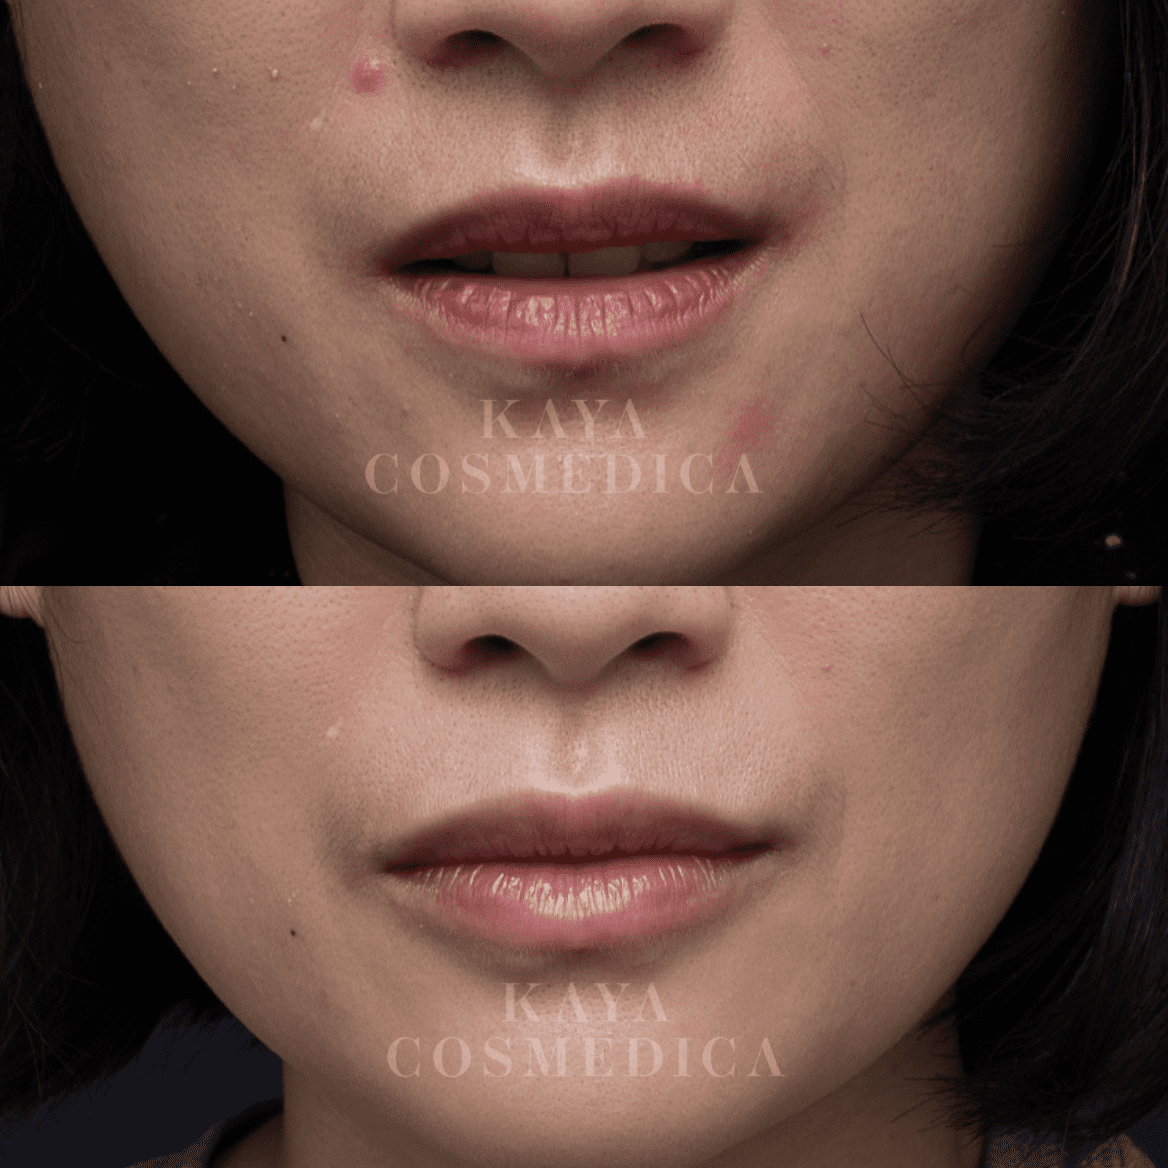 Close-up comparison image of a woman's lips before and after lip augmentation, showing enhanced smoothness and reduced wrinkles post-treatment. The clinic's name, Kaya Cosmedica, is watermarked